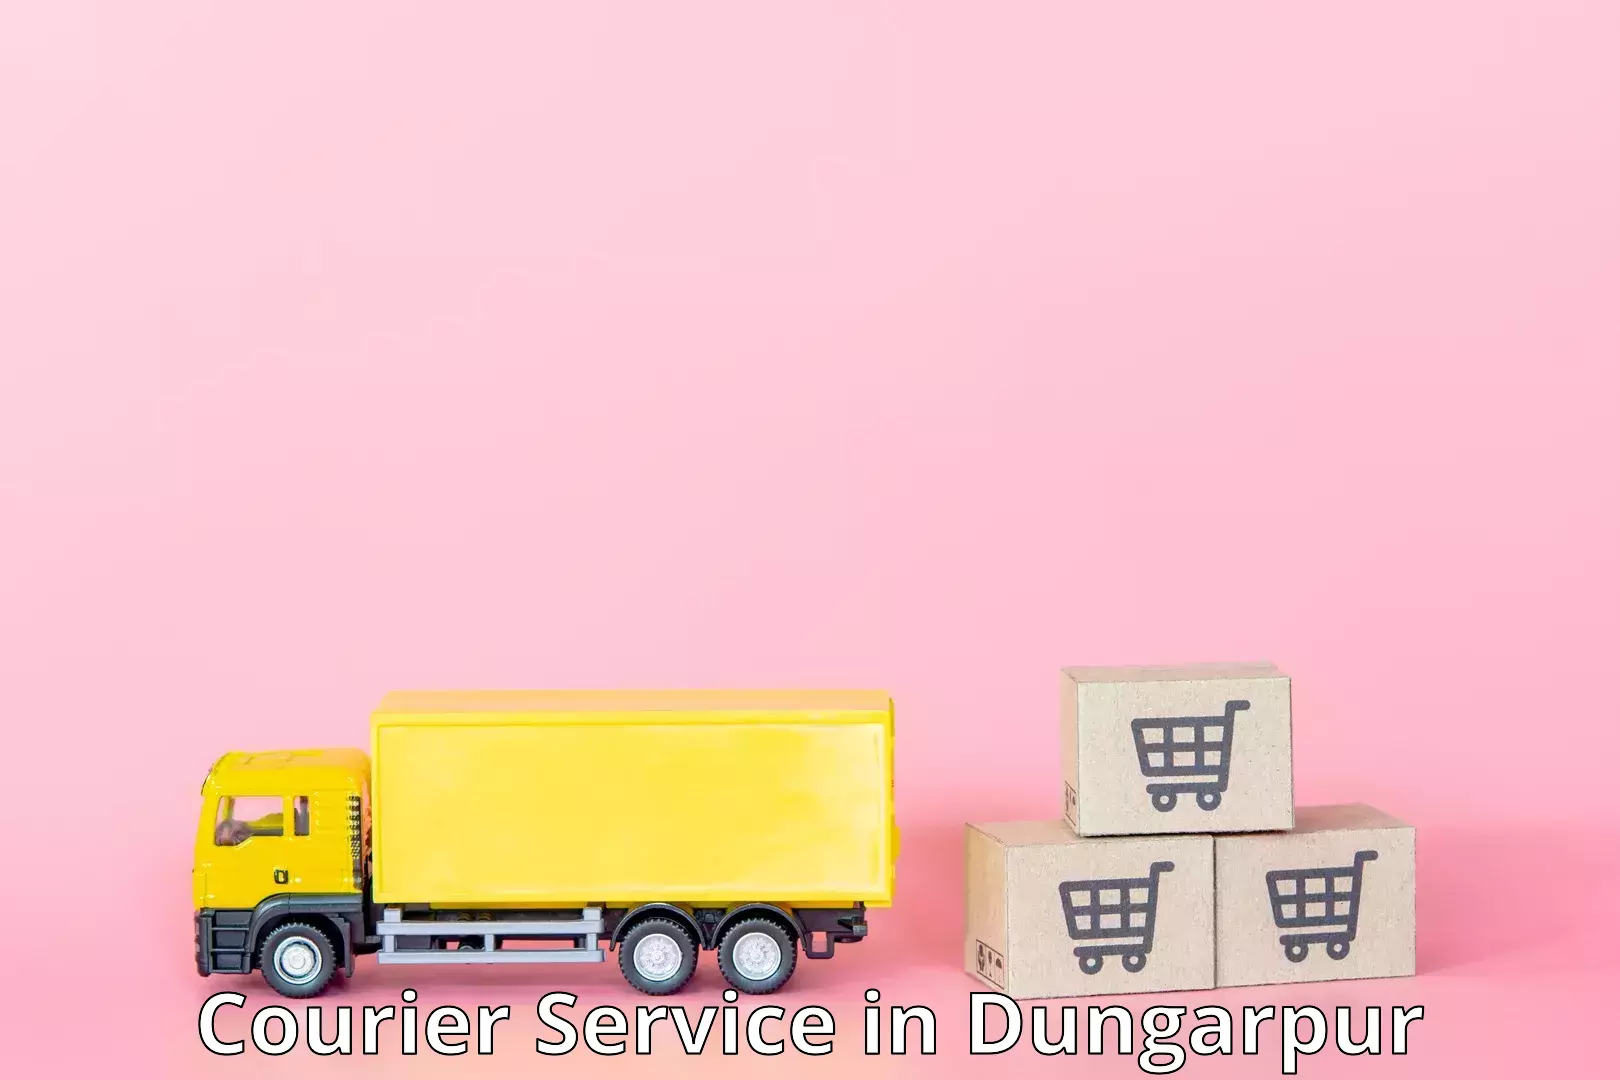 State-of-the-art courier technology in Dungarpur